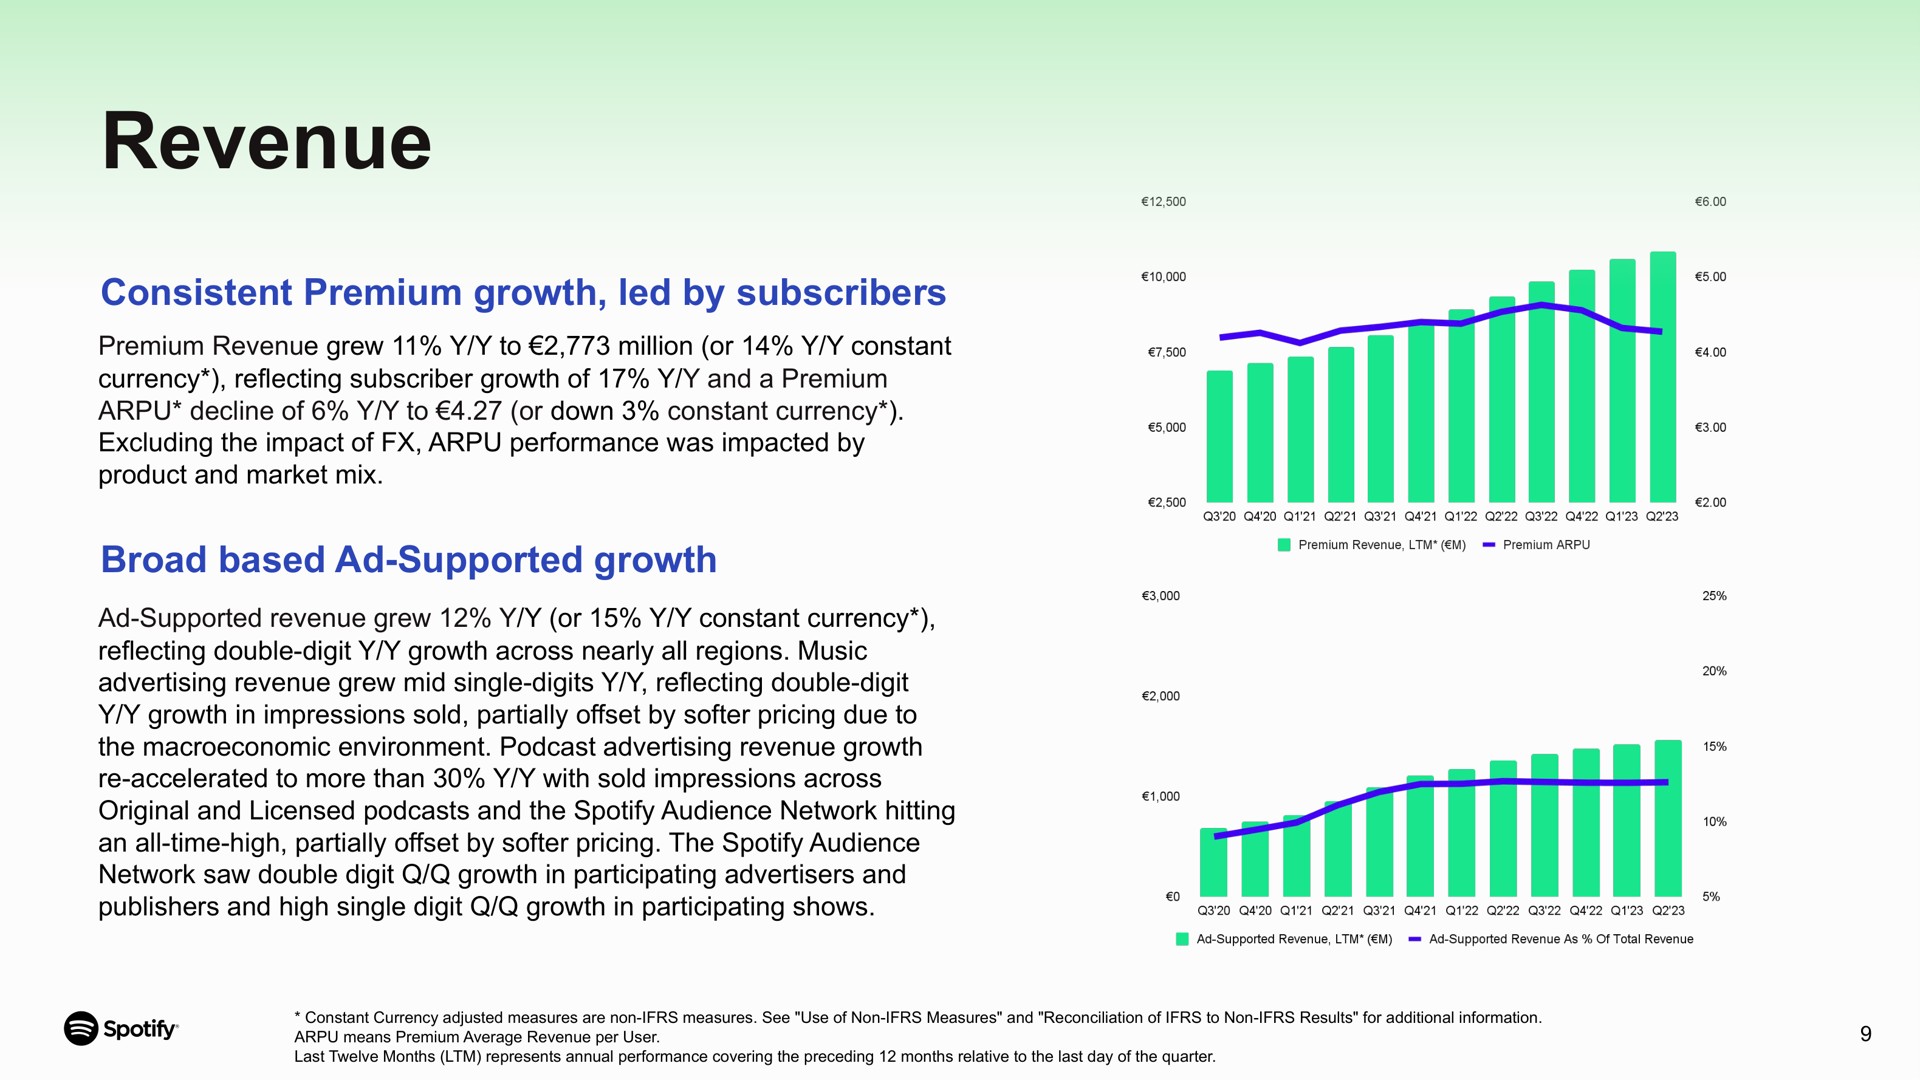 revenue consistent premium growth led by subscribers broad based supported growth decline of to or down constant currency in impressions sold partially offset pricing due to original and licensed and the audience network hitting an all time high partially offset pricing the audience | Spotify